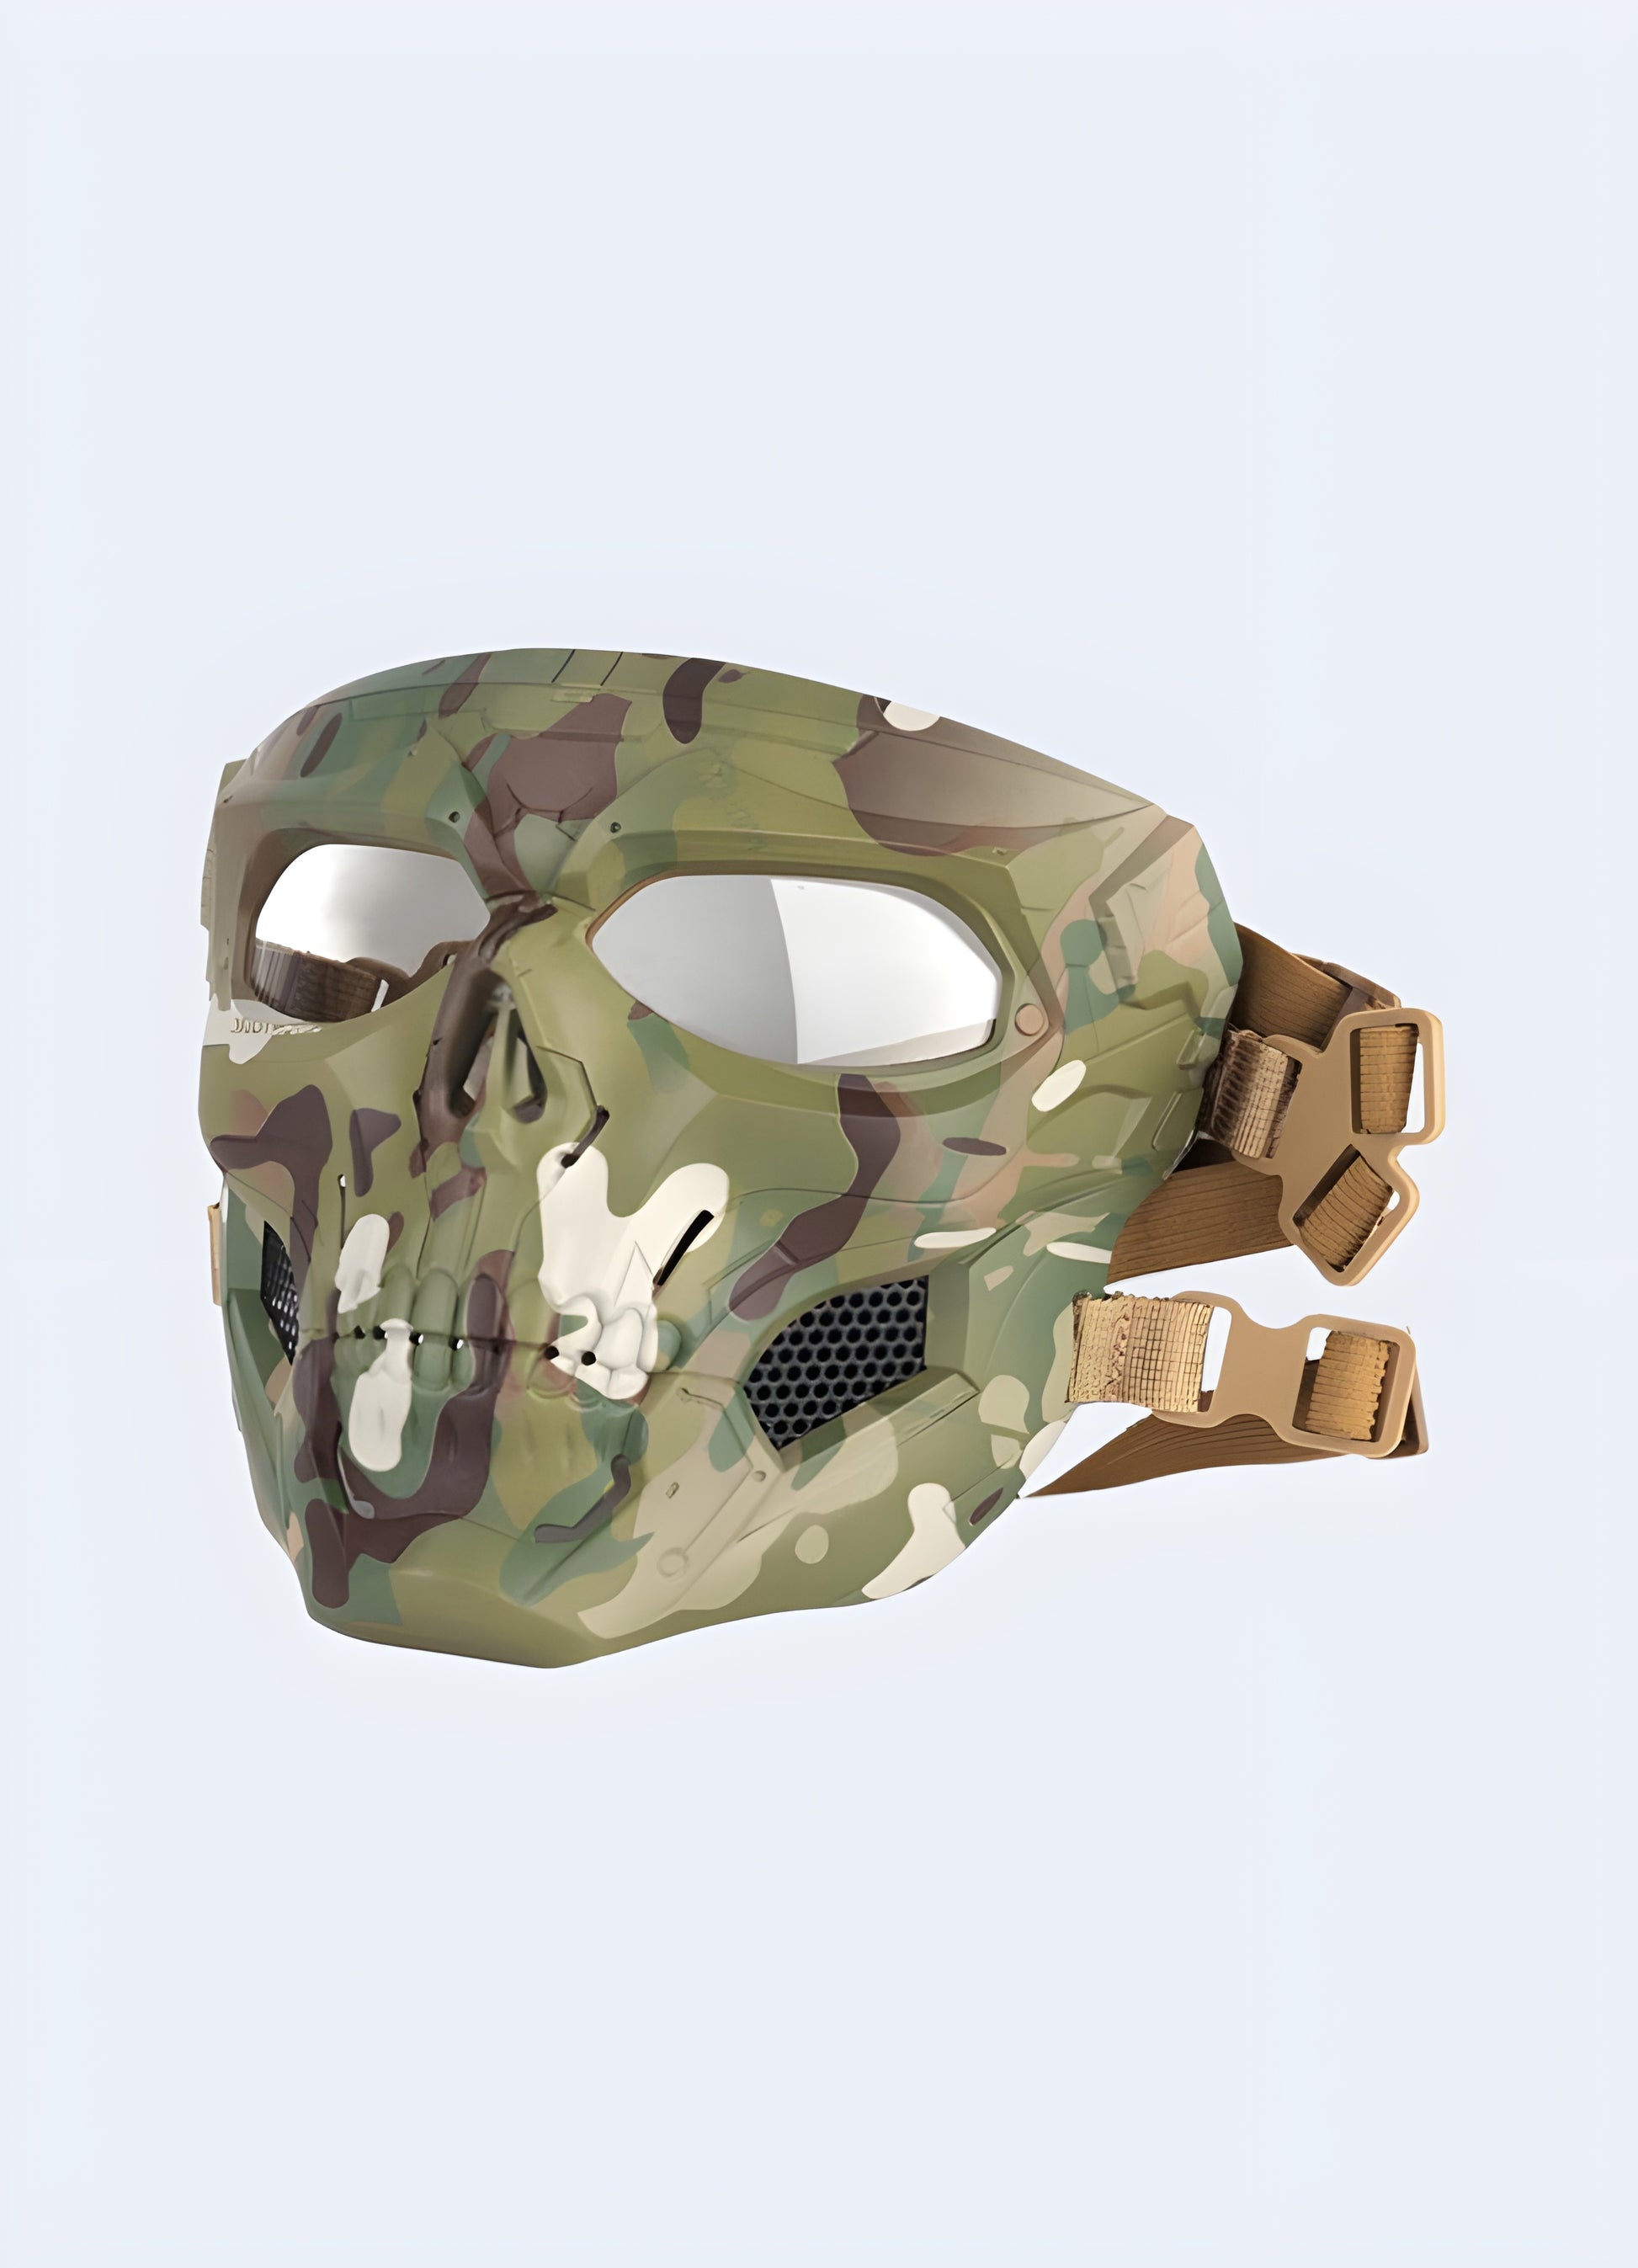 This skull mask transcends gender norms, striking fear into the hearts of all who encounter it. 